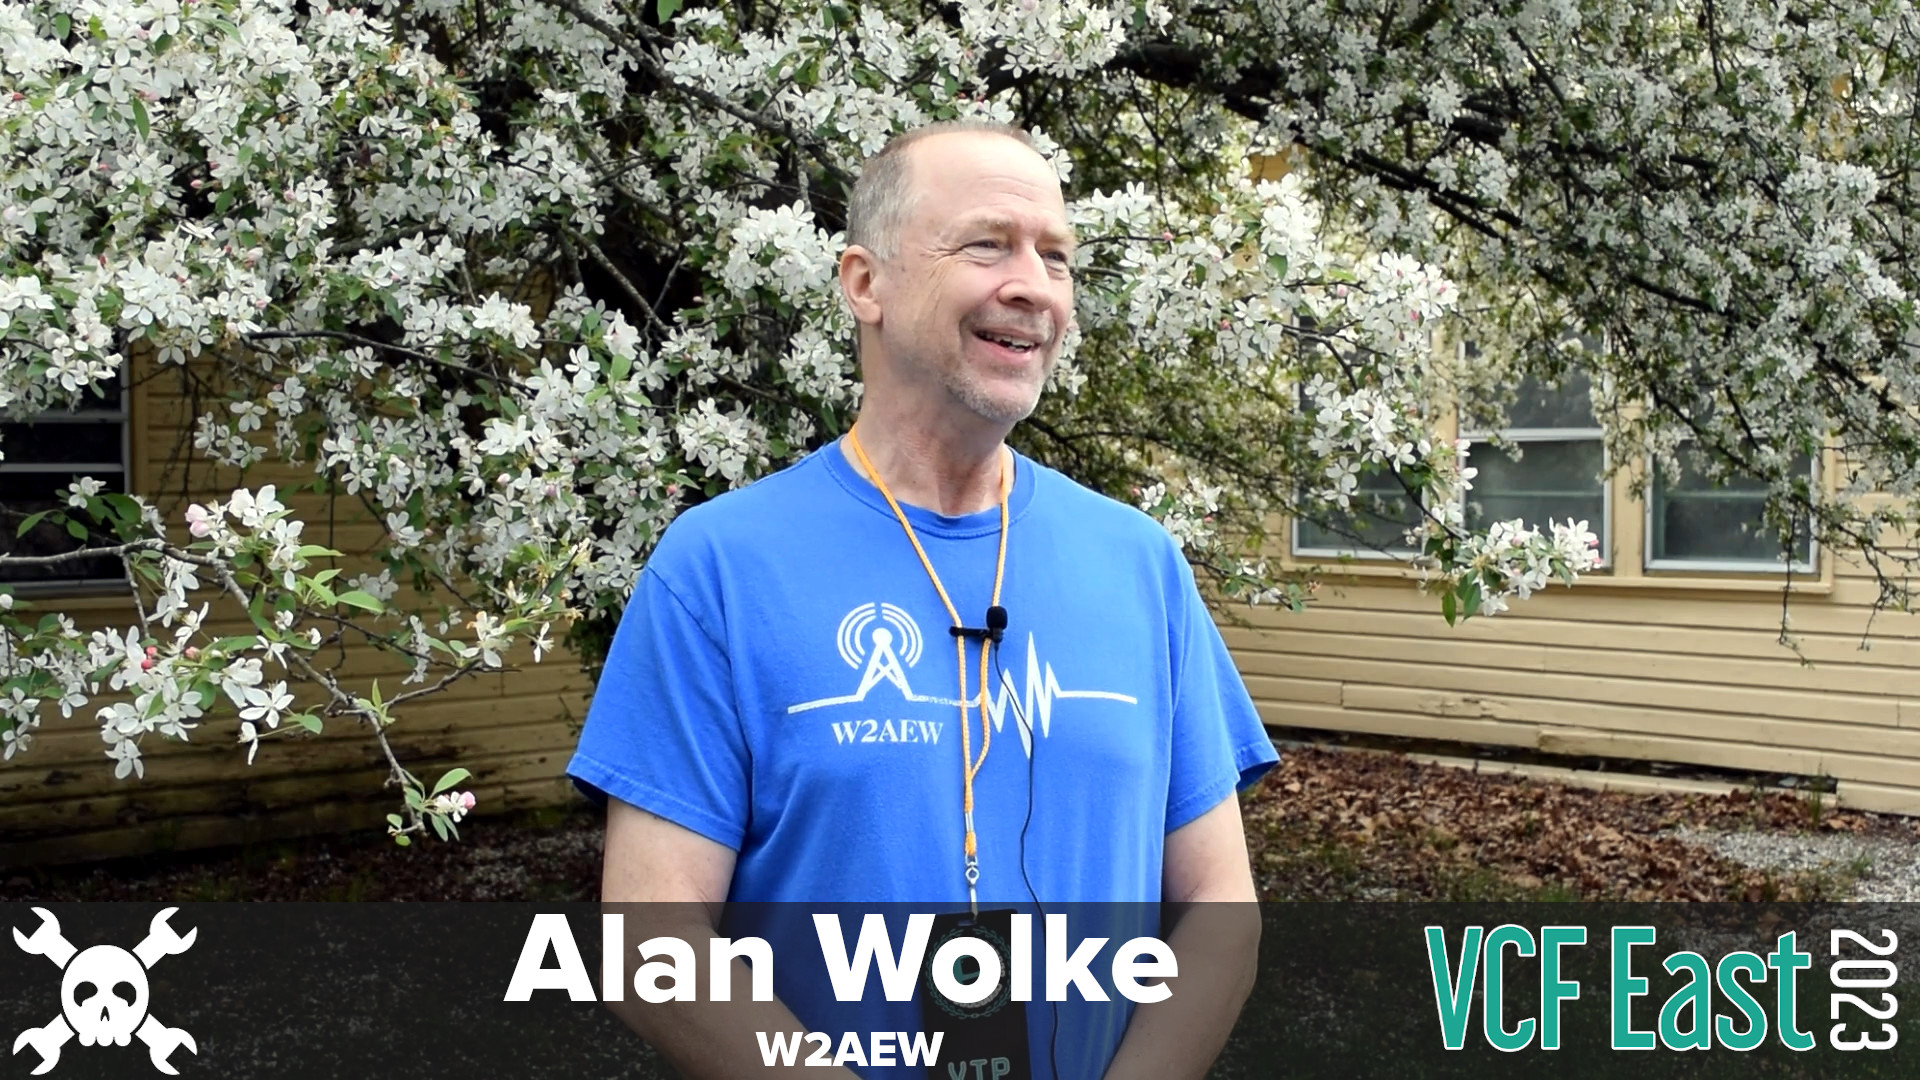 VCF East 2023: Alan Wolke talks about his passion for technology